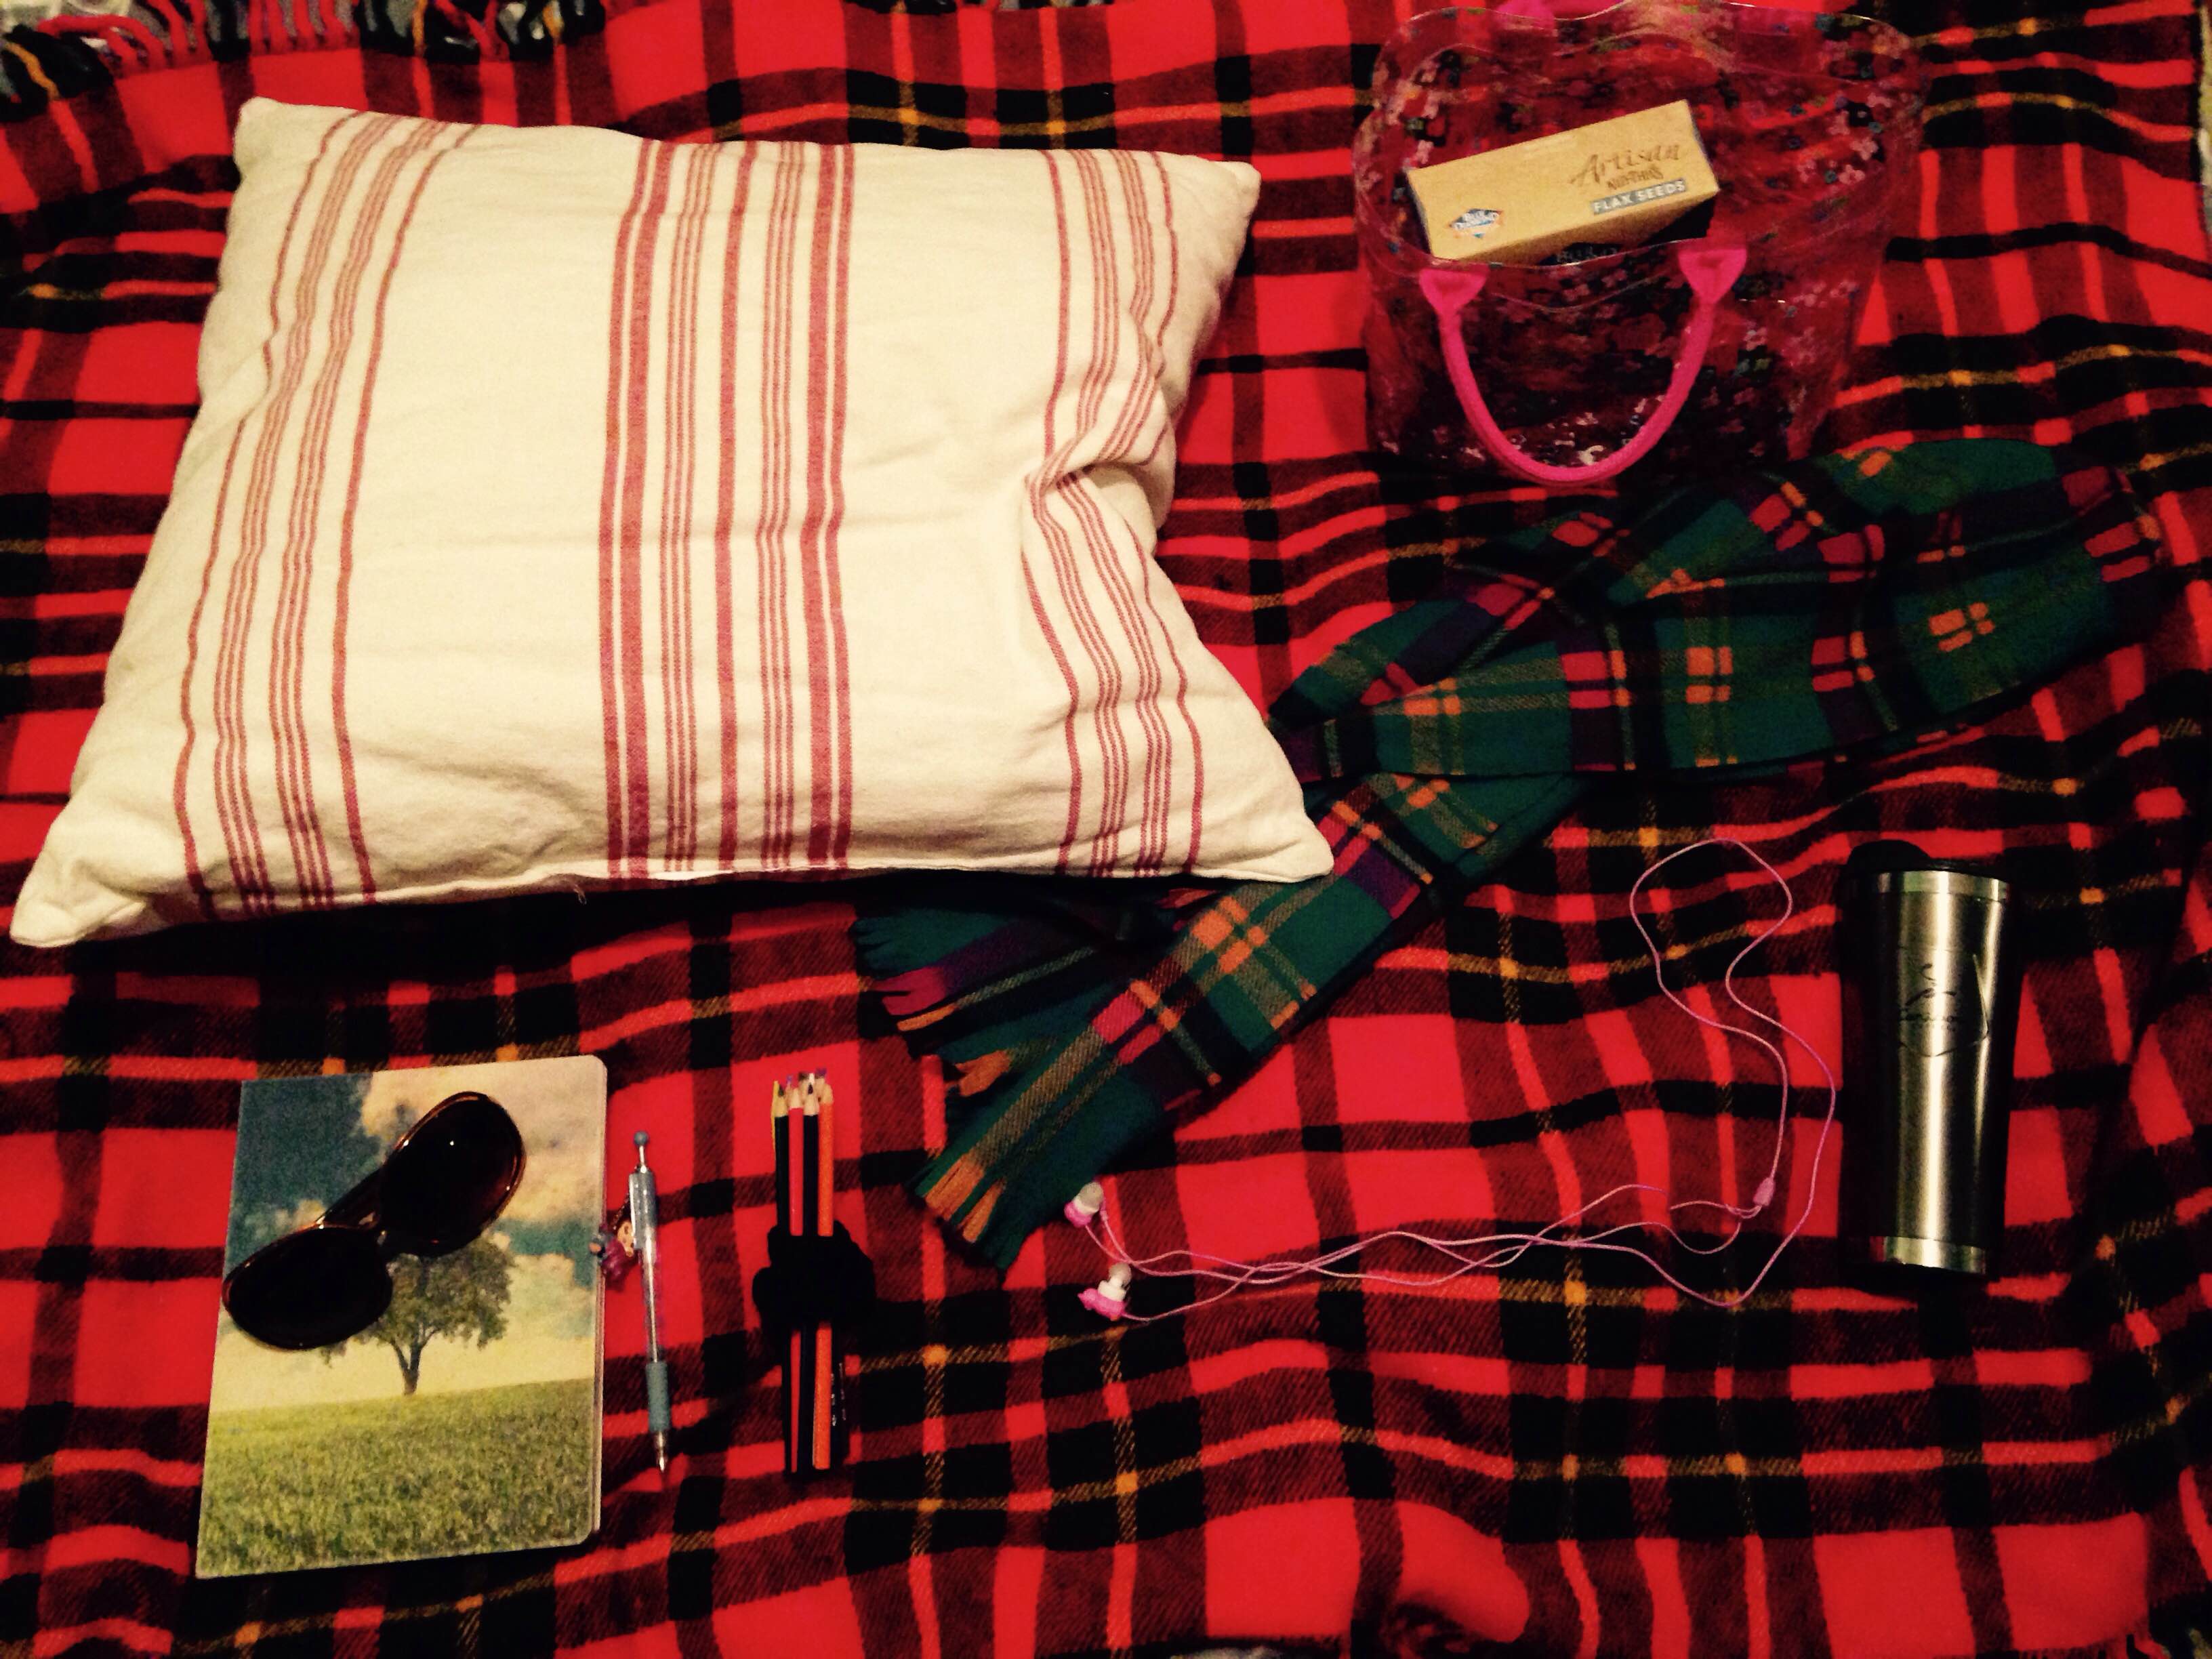 Pillow, notebook, pencils, earbuds, and a cup on a flannel blanket